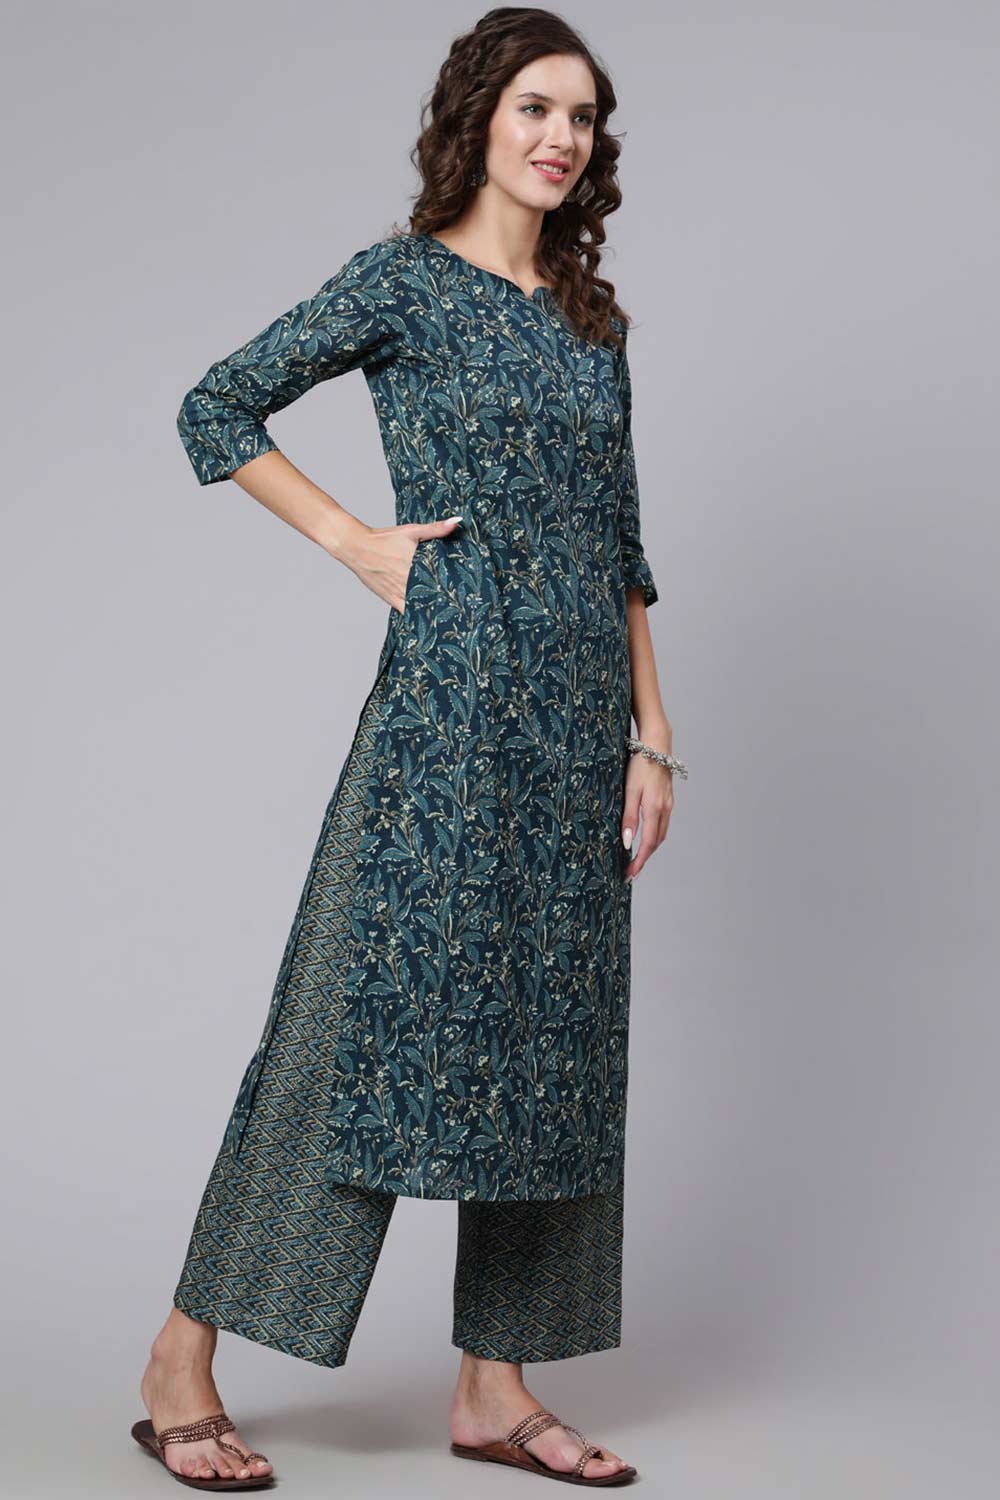 Buy Teal Blue Cotton Printed Ethnic Kurta With Palazzo Online - Side